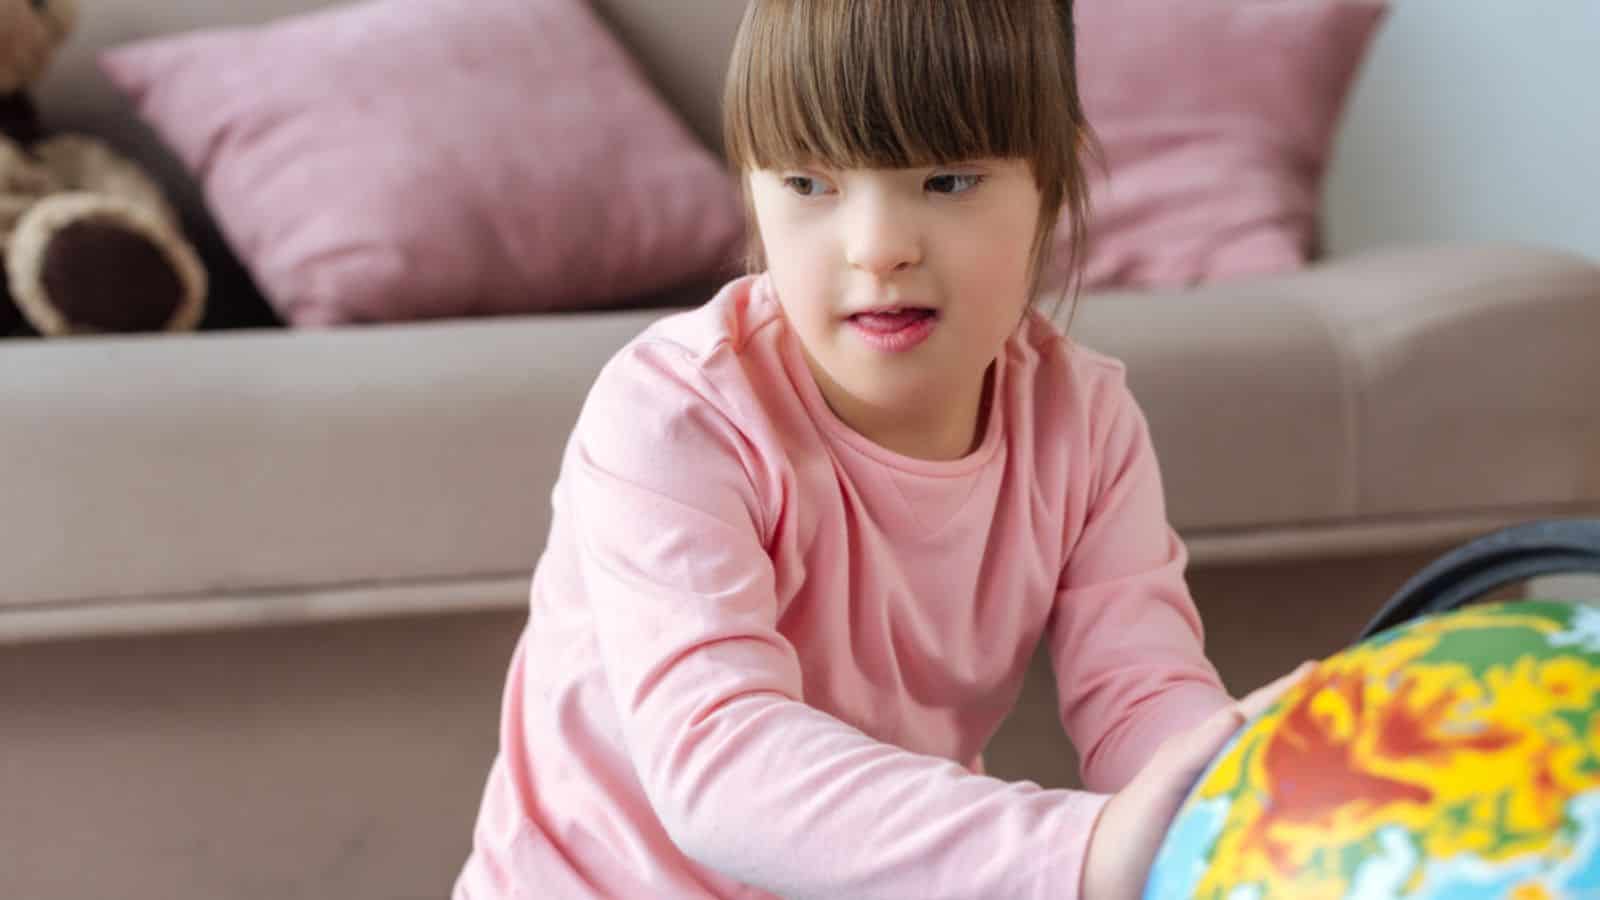 Kid with down syndrome playing with globe